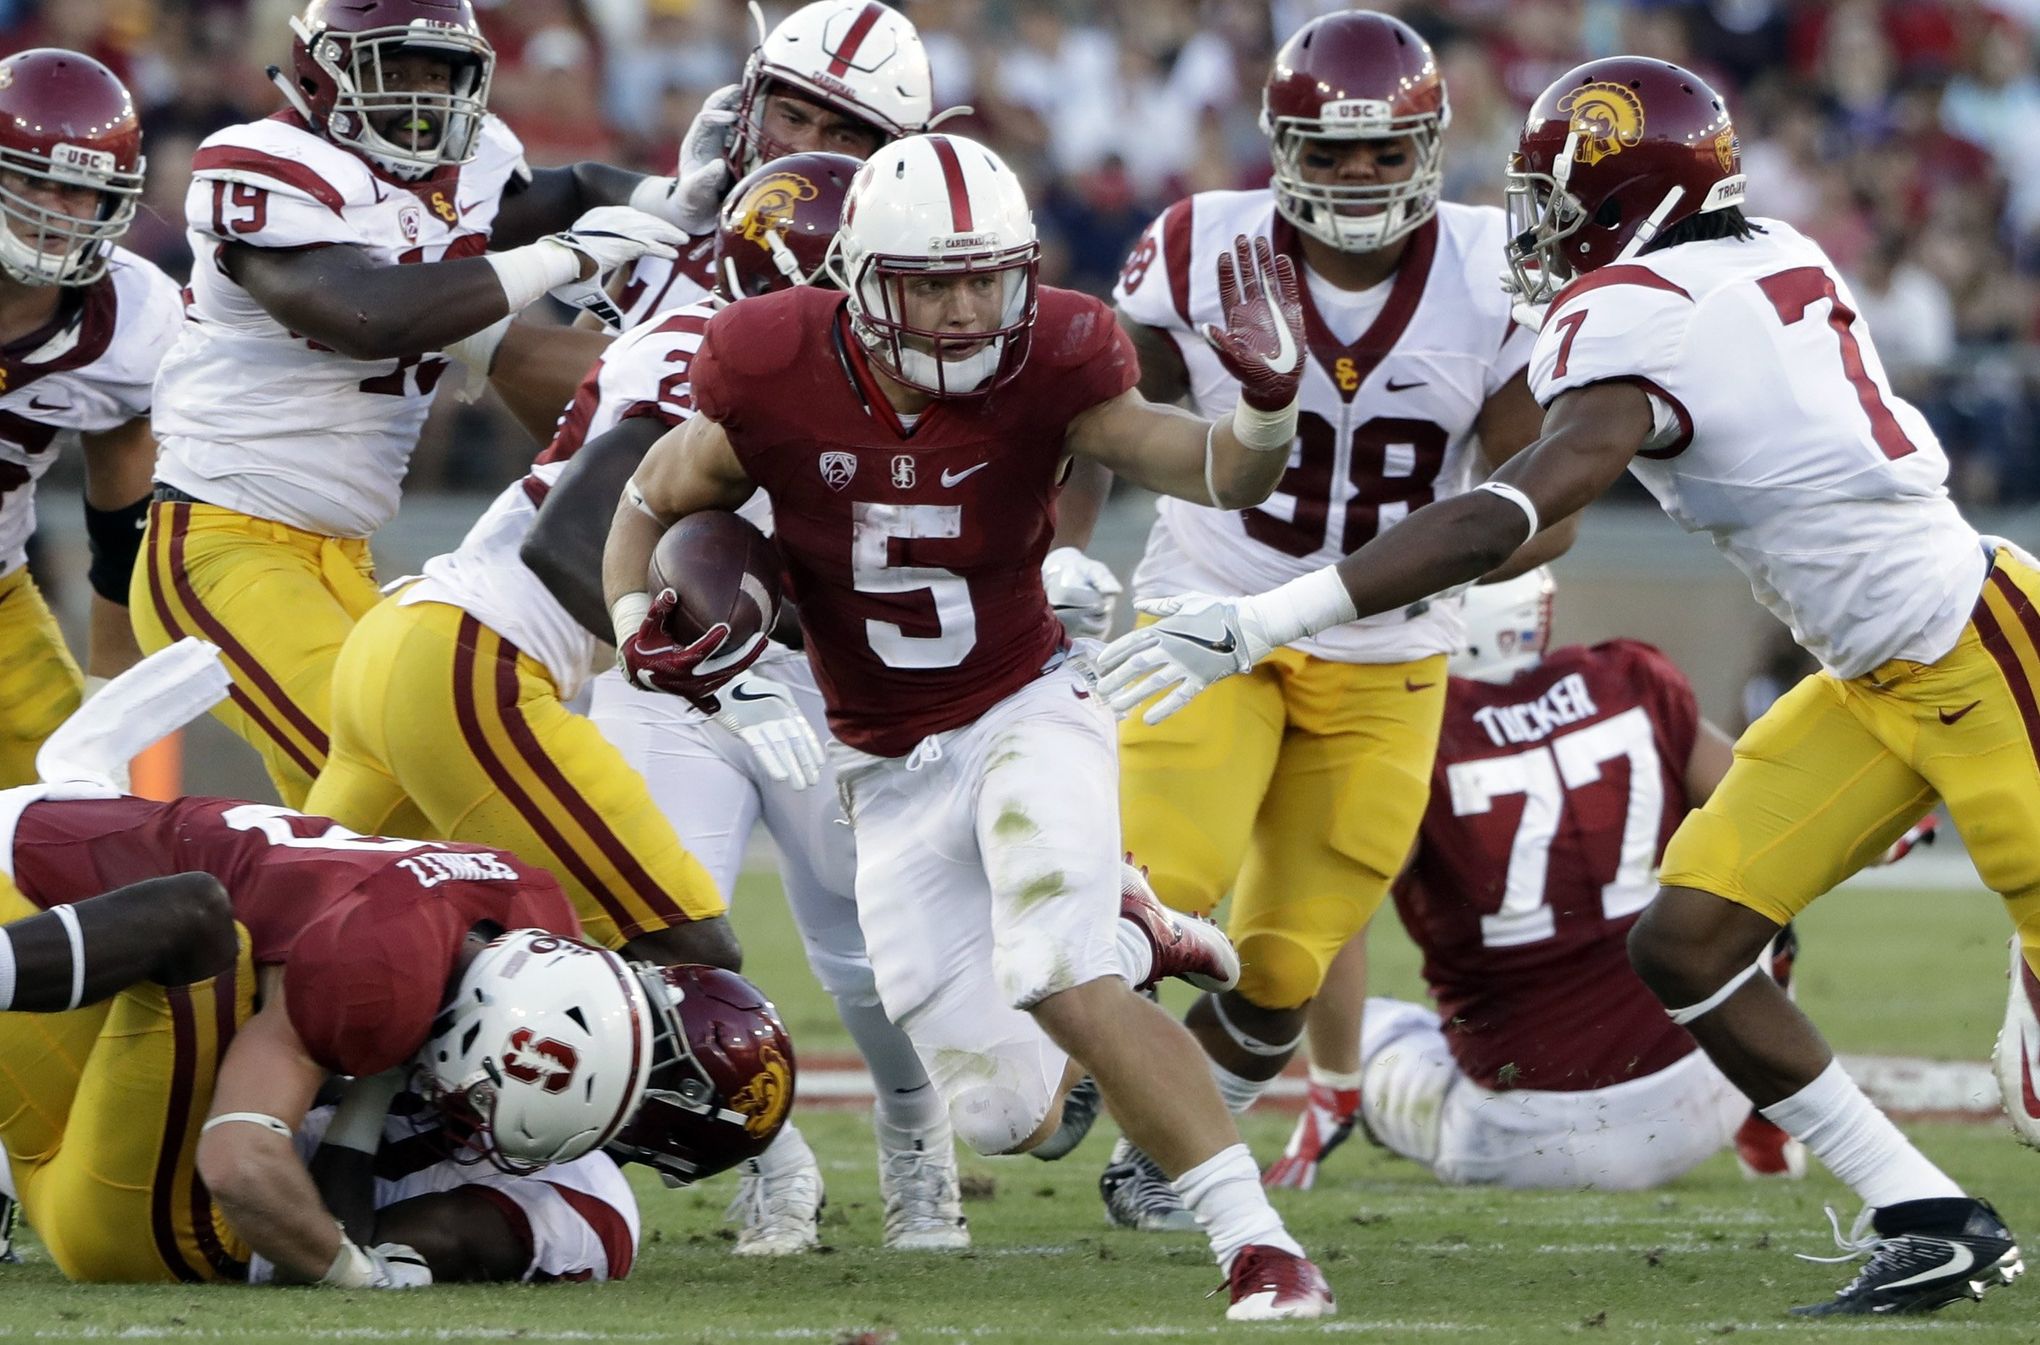 Stanford's Christian McCaffrey makes maybe his best move by skipping Sun  Bowl